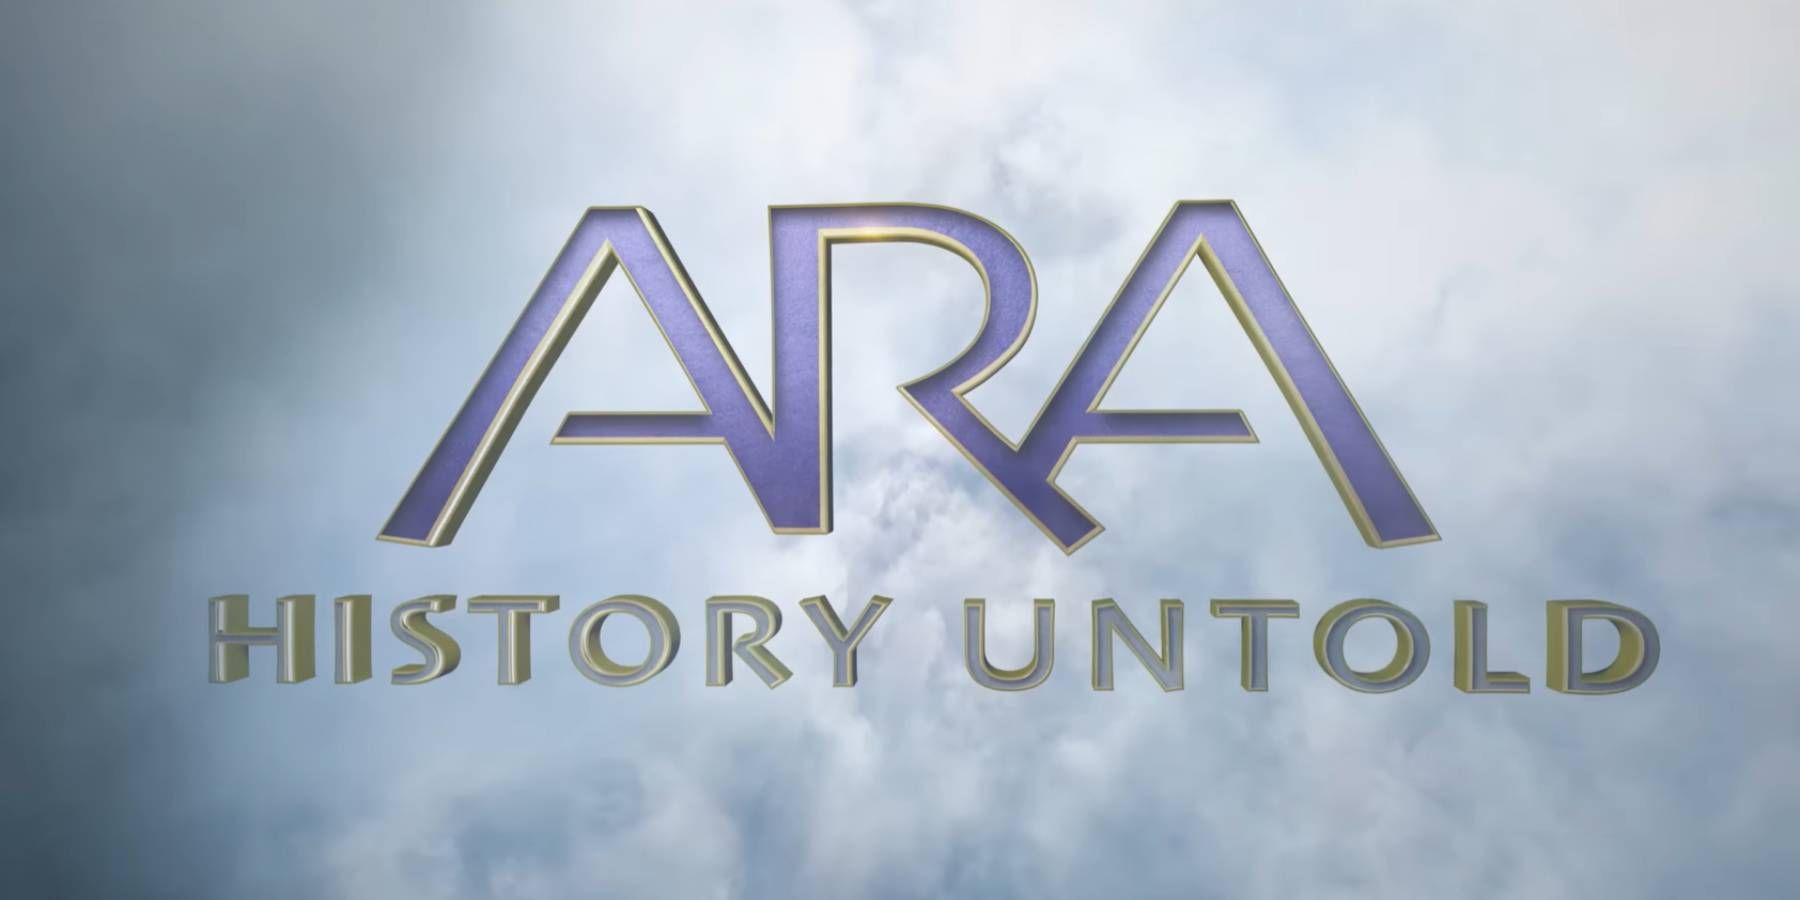 Ara: History Untold's logo in the clouds from the gameplay trailer